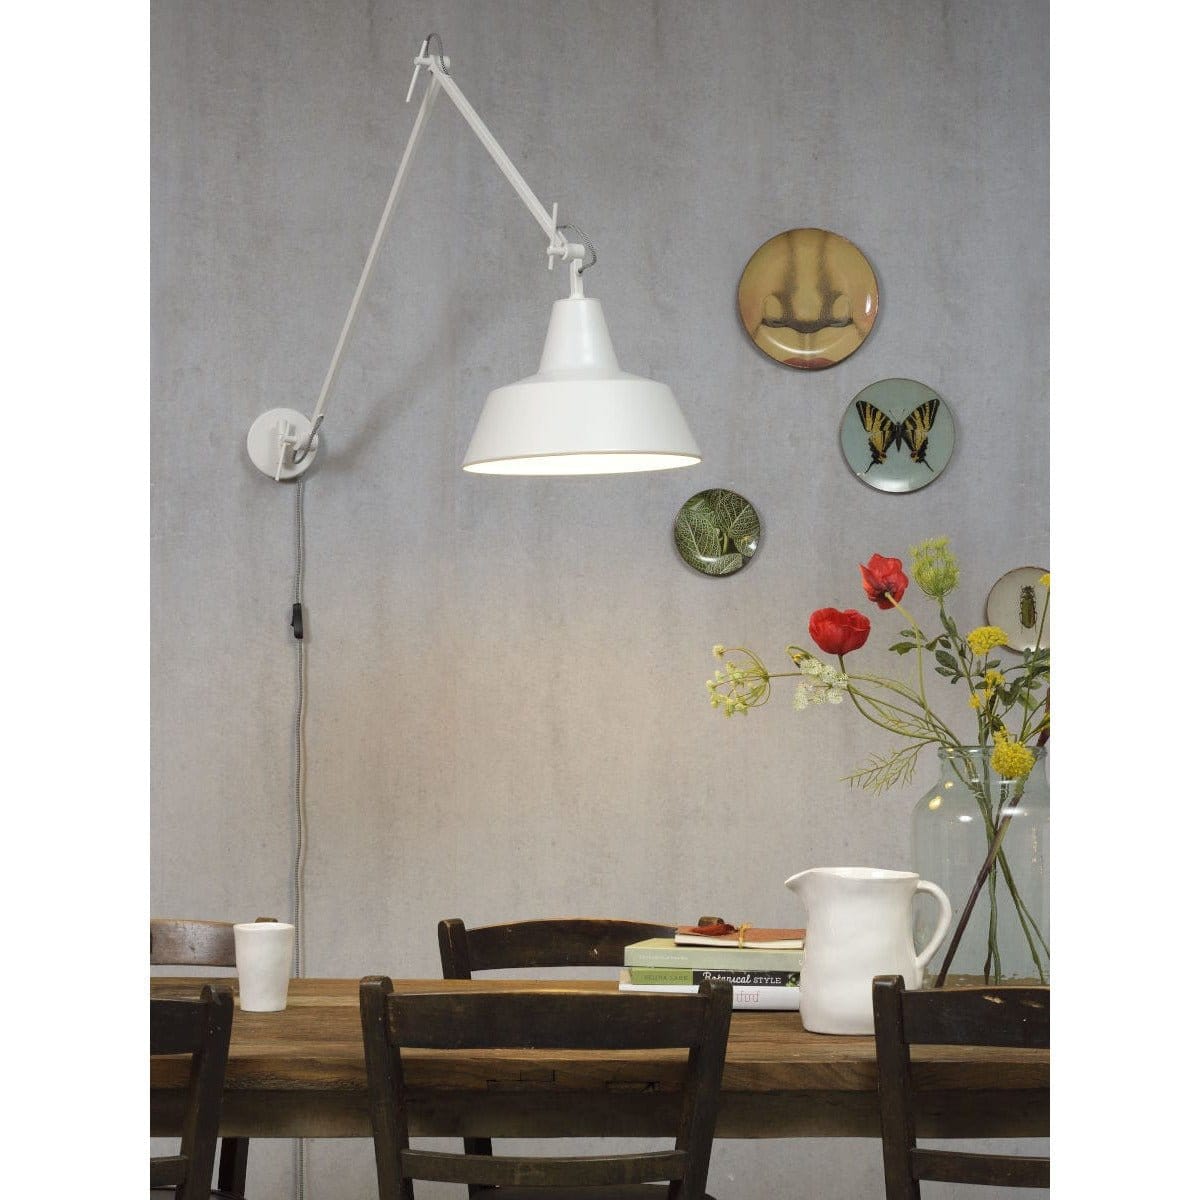 It's About RoMi Wall Lights White Chicago Wall Light, black, grey green or white